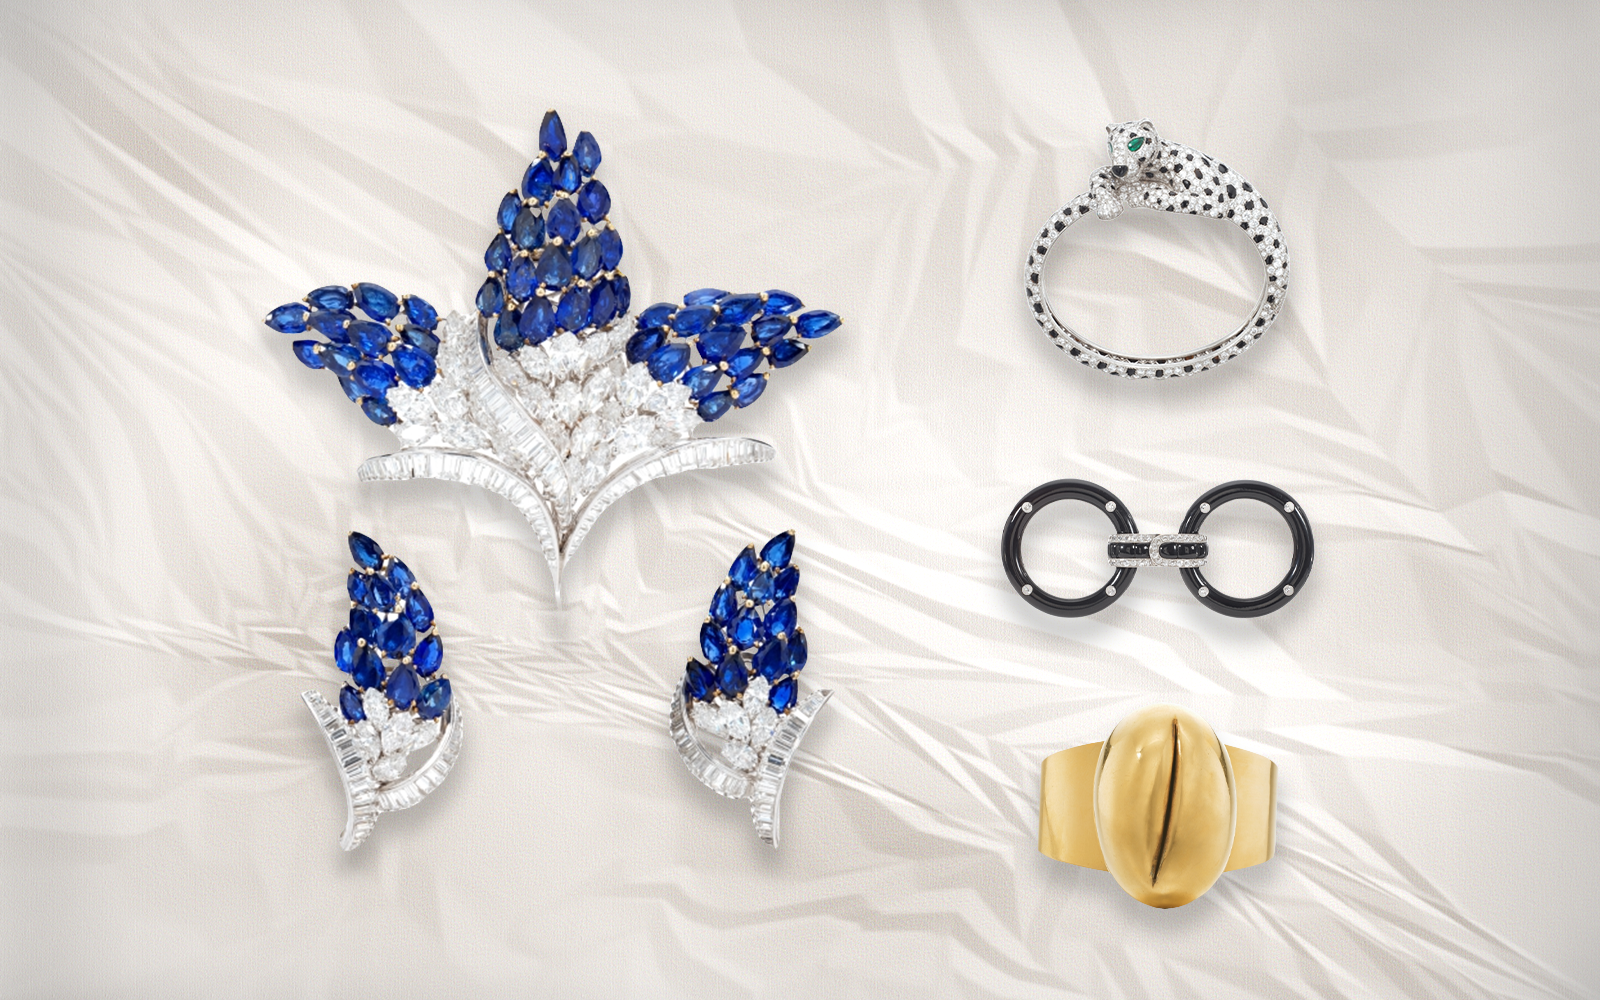 Clockwise from left to right: Bulgari brooch and earrings (estimate CHF 55,000-75,000), Cartier Leopard bangle (estimate CHF 250,000-350,000), Van Cleef & Arpels onyx and diamond belt buckle, circa 1922 (estimate CHF 20,000 - 40,000), and Lucio Fontana 'Spatial Concept With Slit' gold bangle, circa 1967-1968 (estimate 40,000 - 60,000), part of the Sotheby’s ‘Iconic Jewels: Her Sense of Style’ auction in May 2024